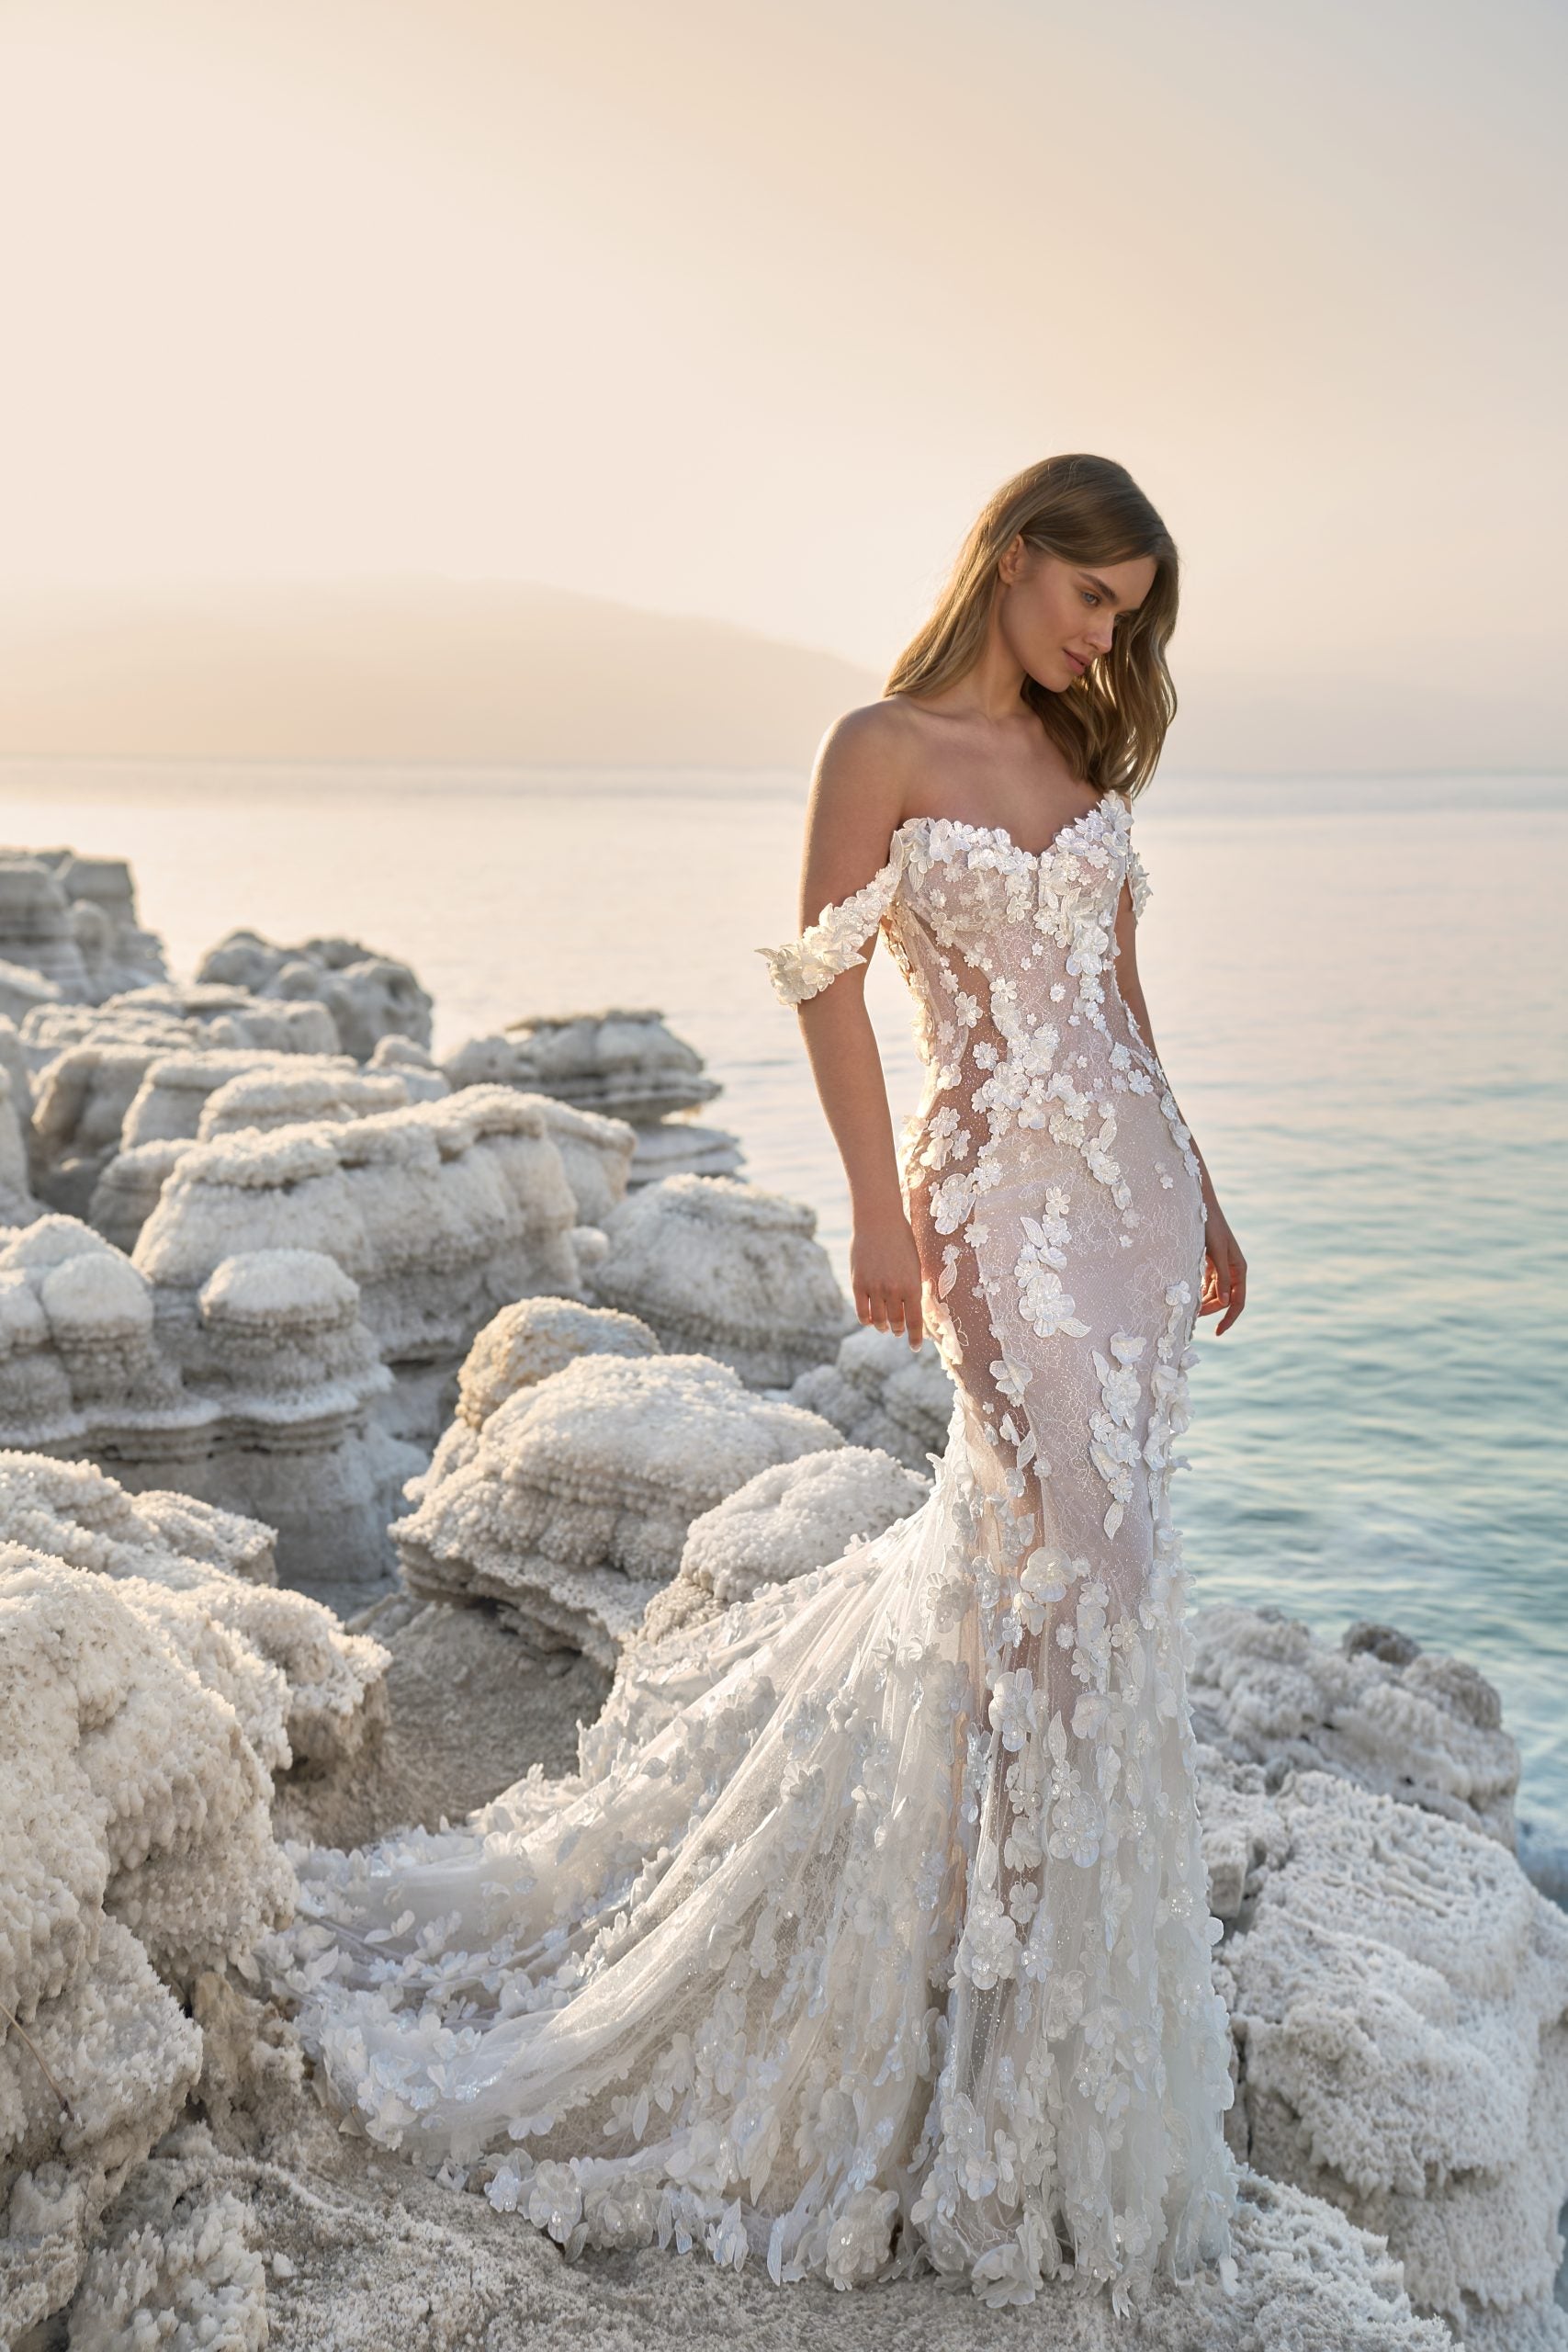 Off-the-Shoulder Floral Fit-and-Flare Gown by Lee Petra Grebenau - Image 1